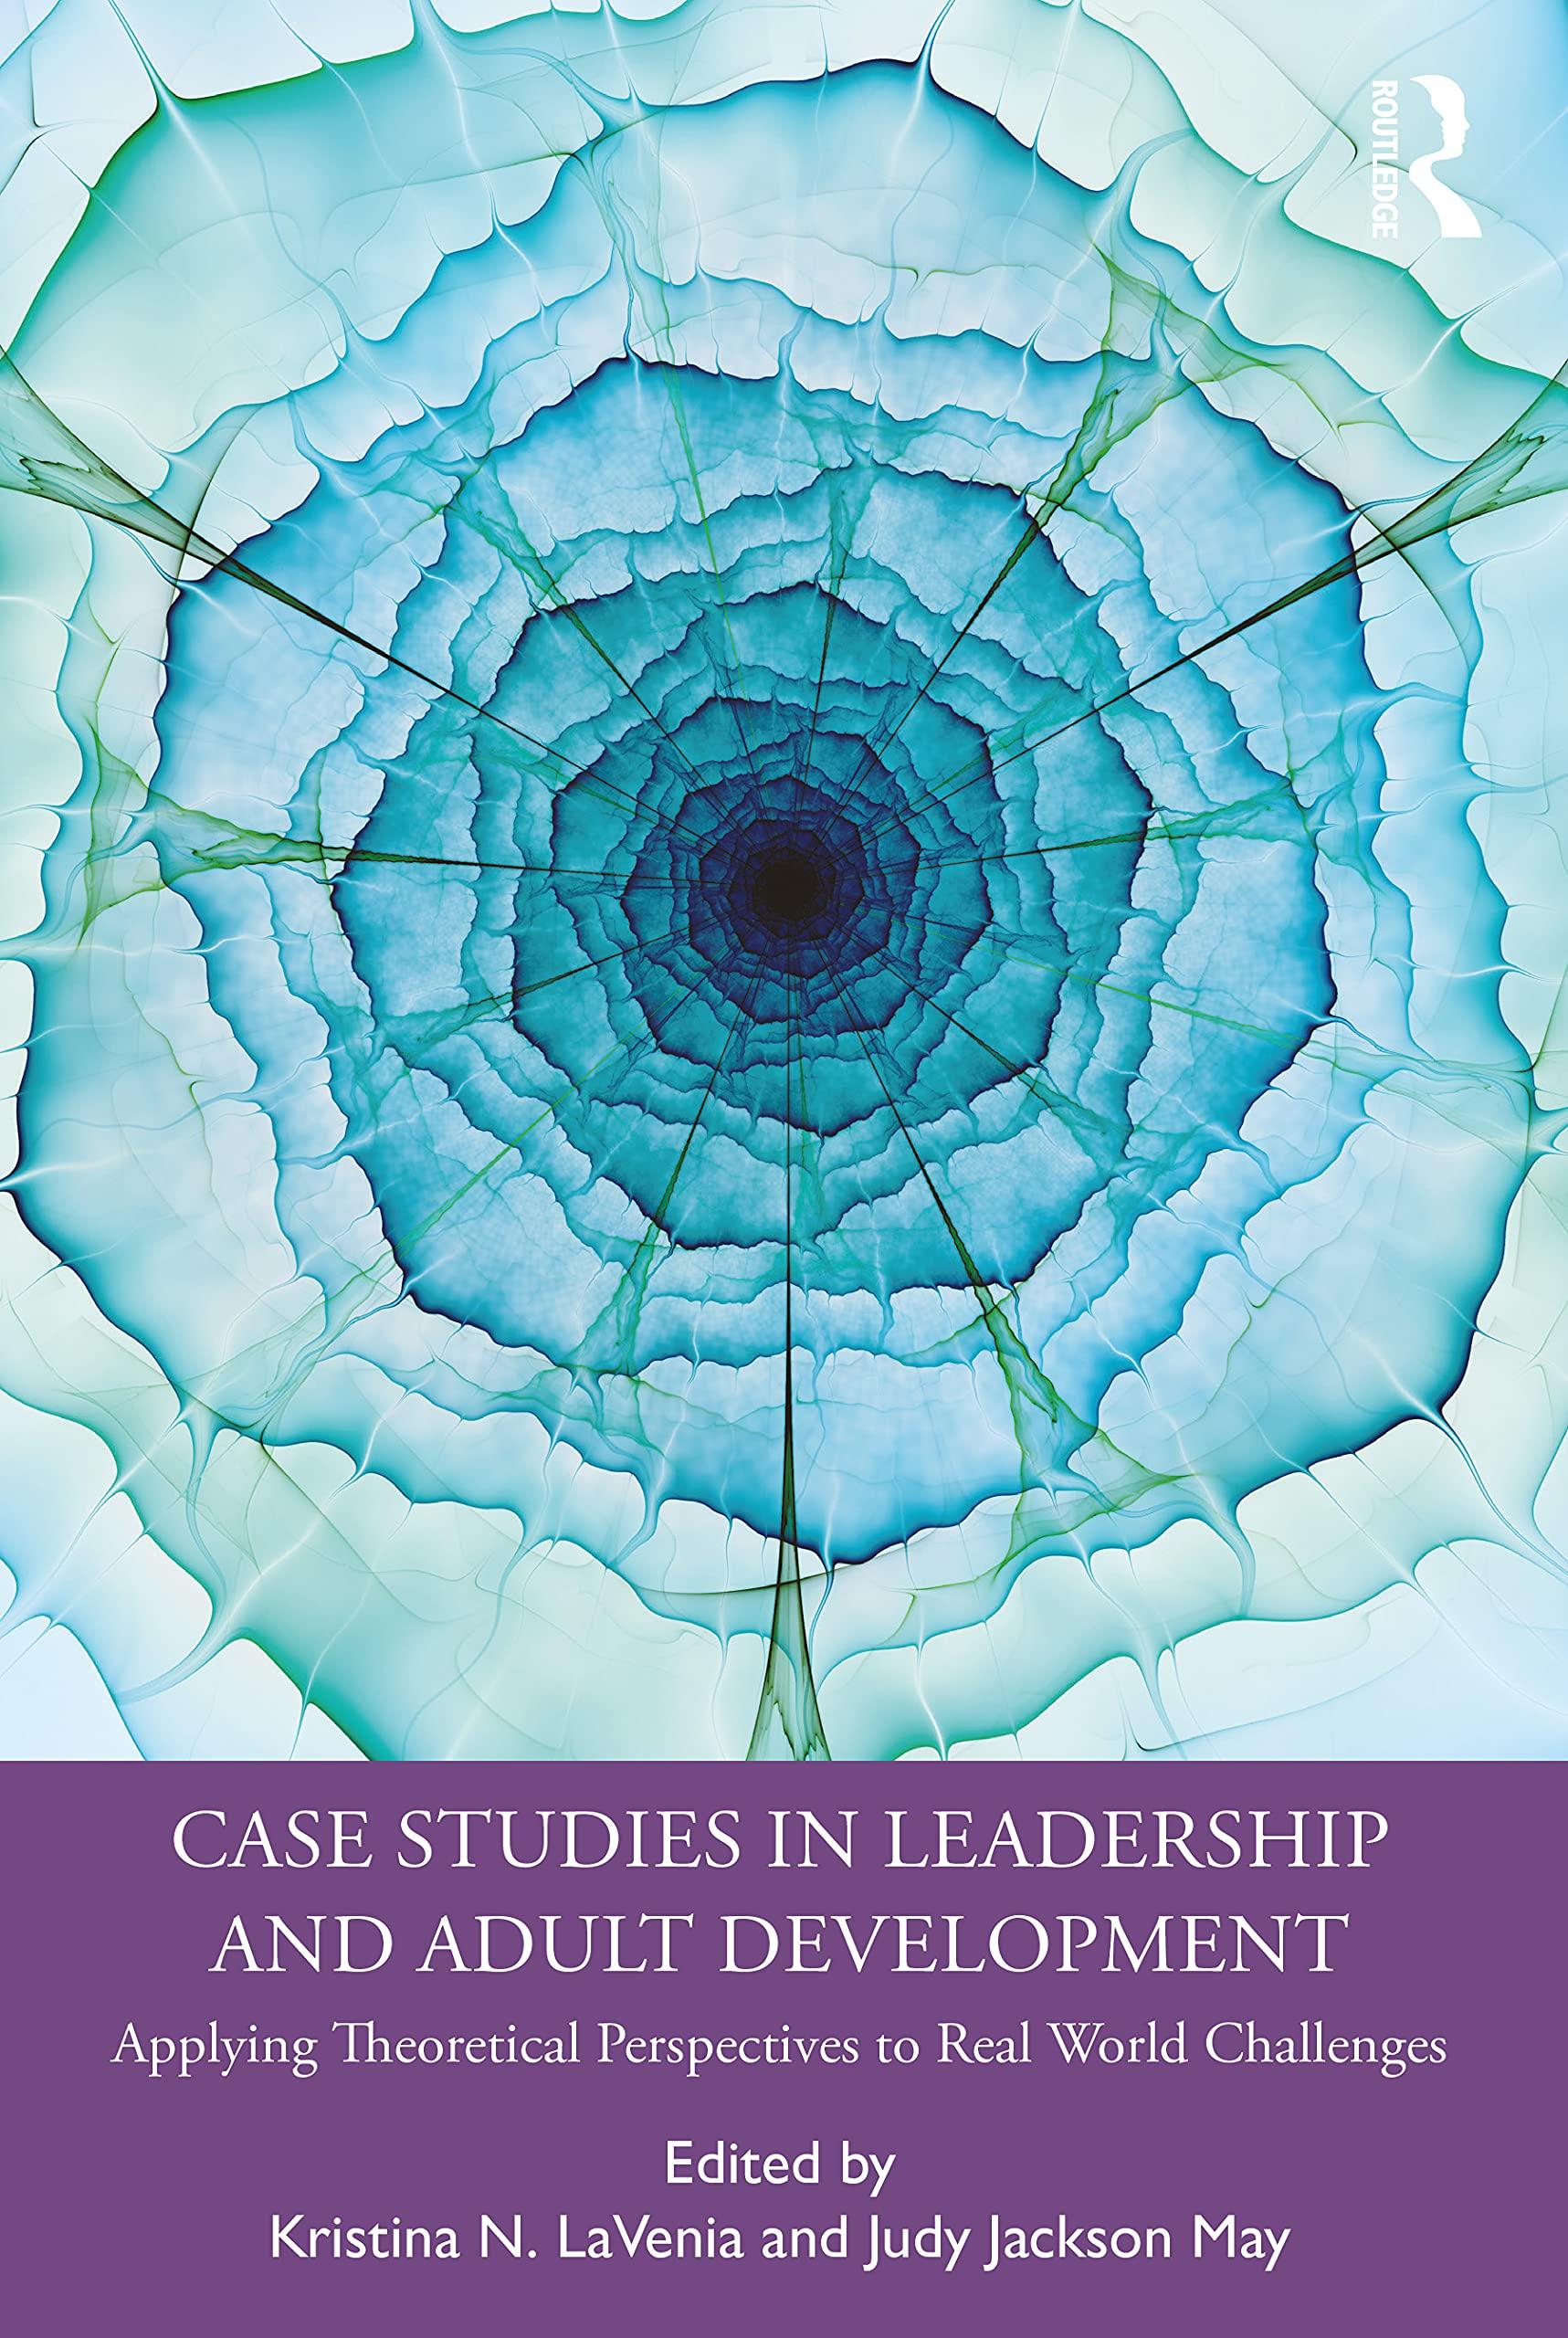 case studies in leadership and adult development applying theoretical perspectives to real world challenges